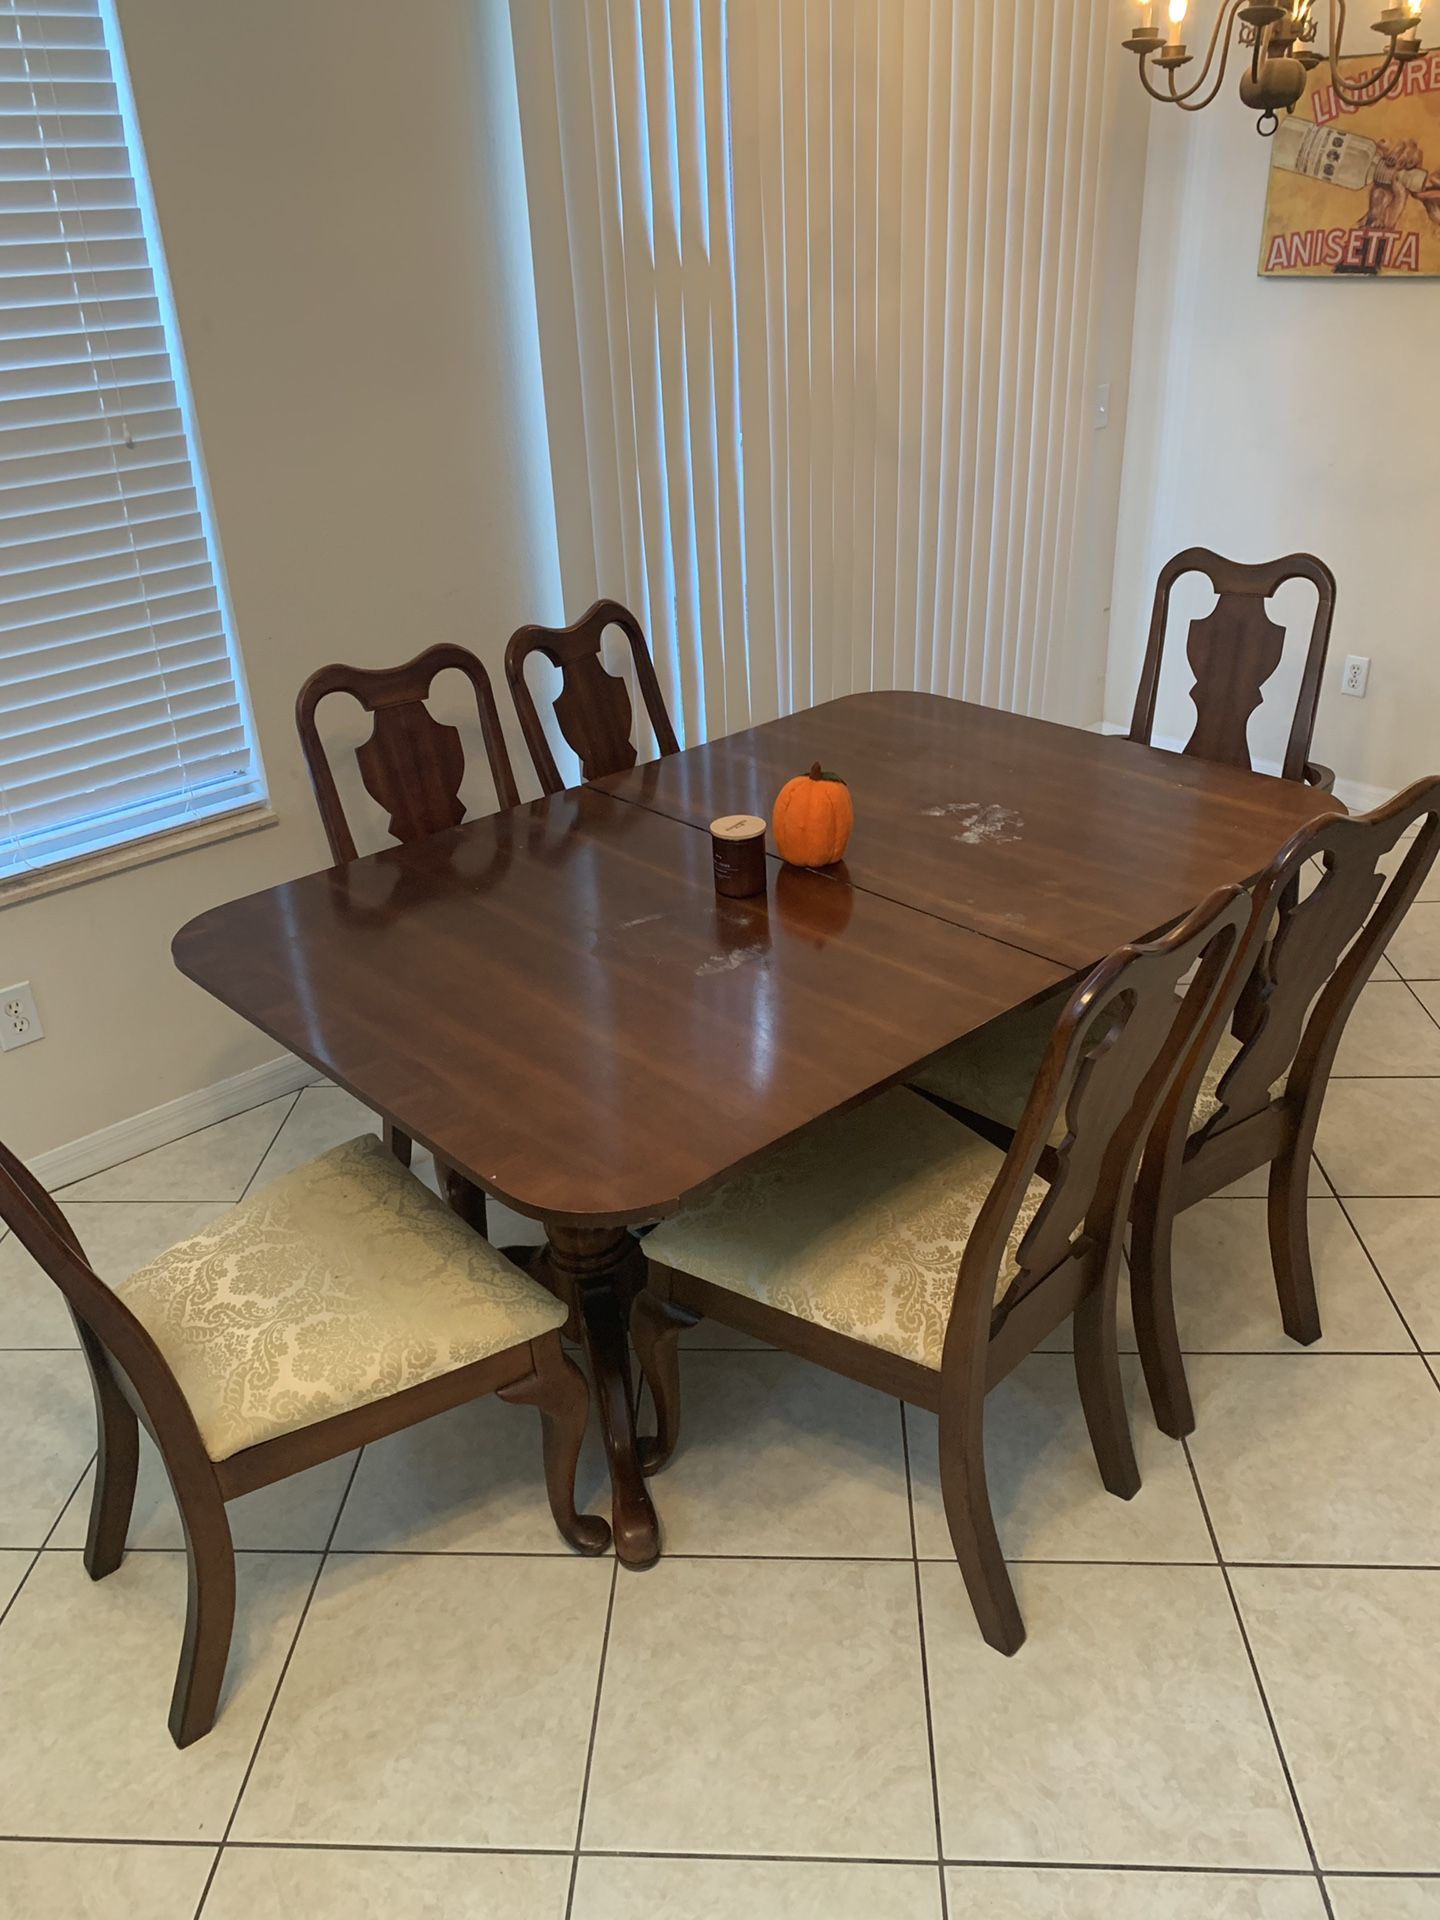 Dining room table, chairs and buffet